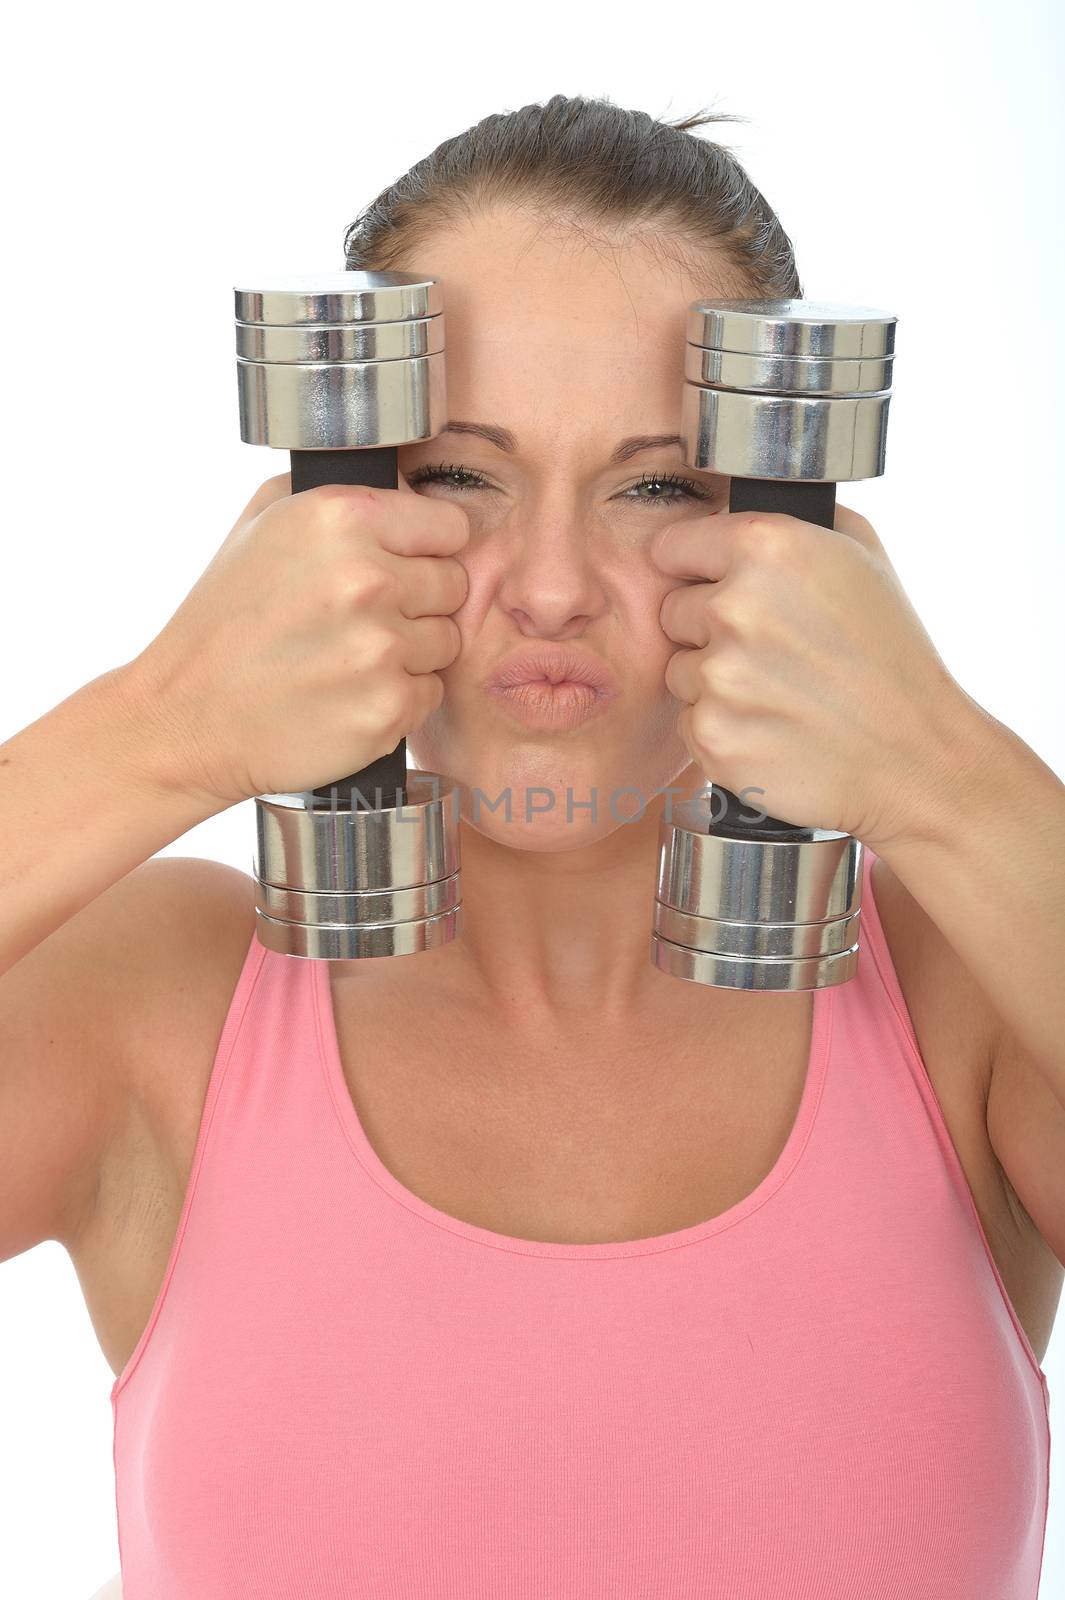 Healthy Young Woman Stressing While Training With Weights by Whiteboxmedia